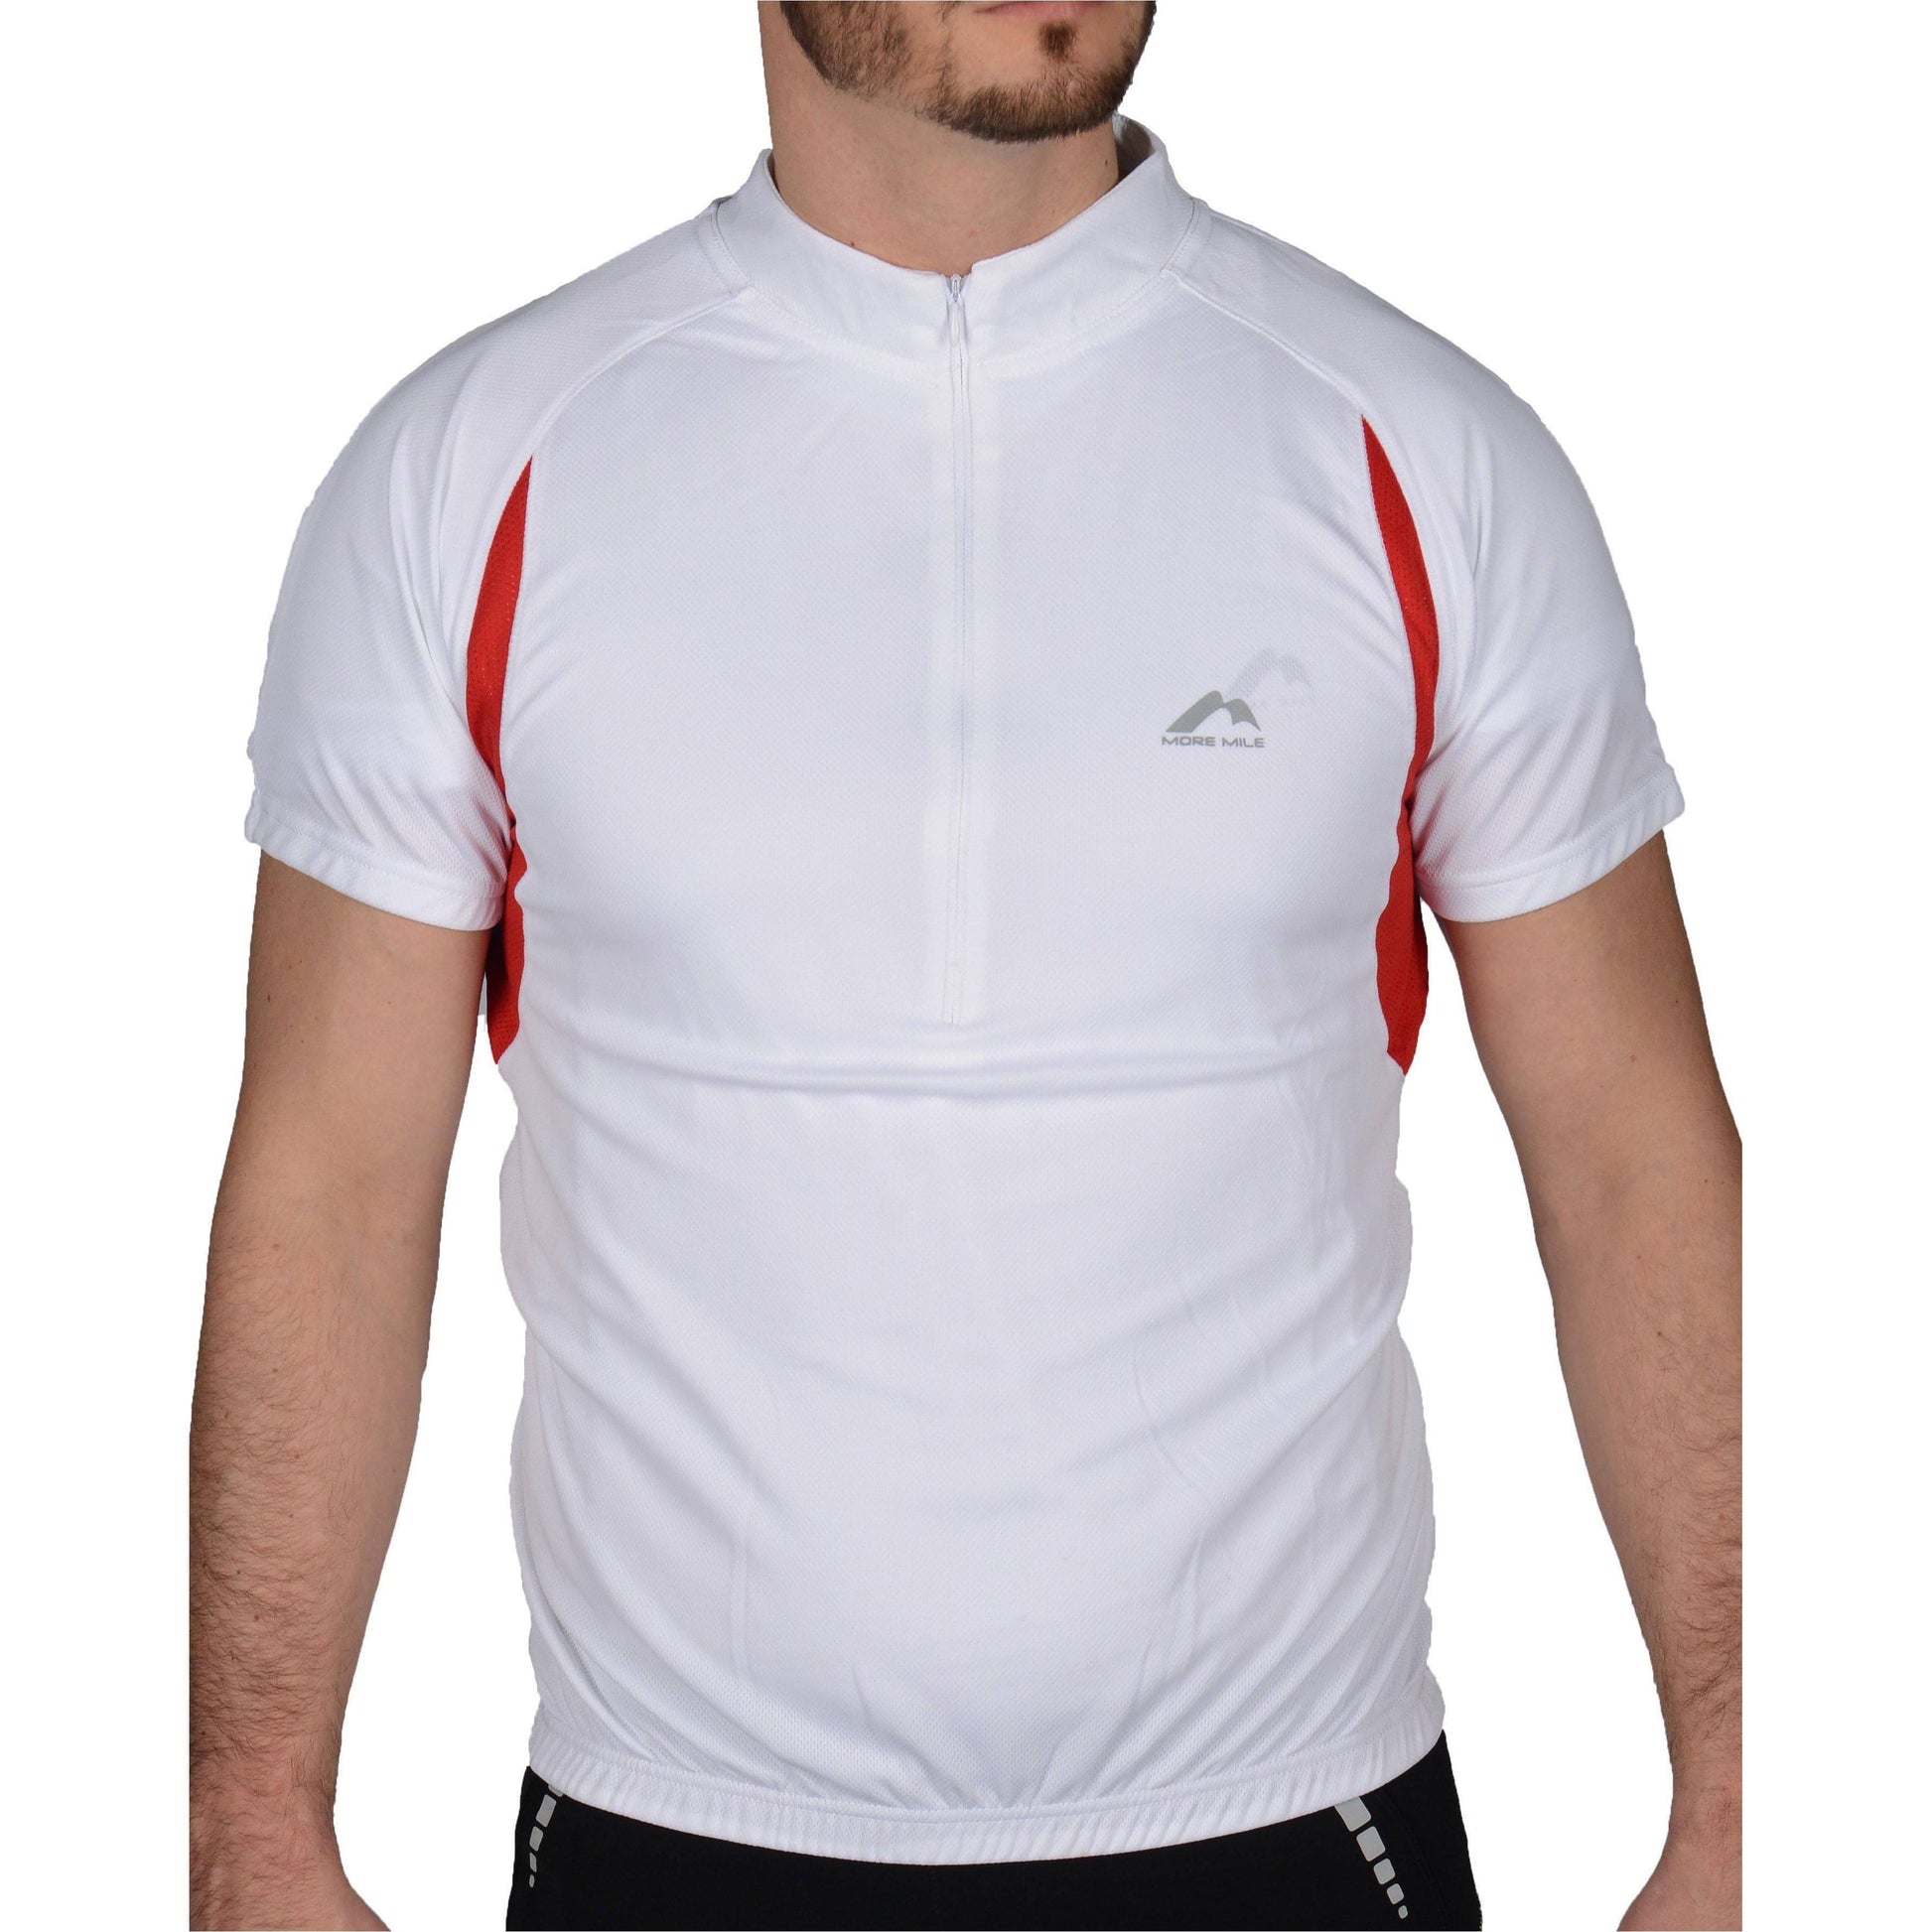 More Mile Short Sleeve Half Zip Mens Cycling Jersey - White 5055604327737 - Start Fitness